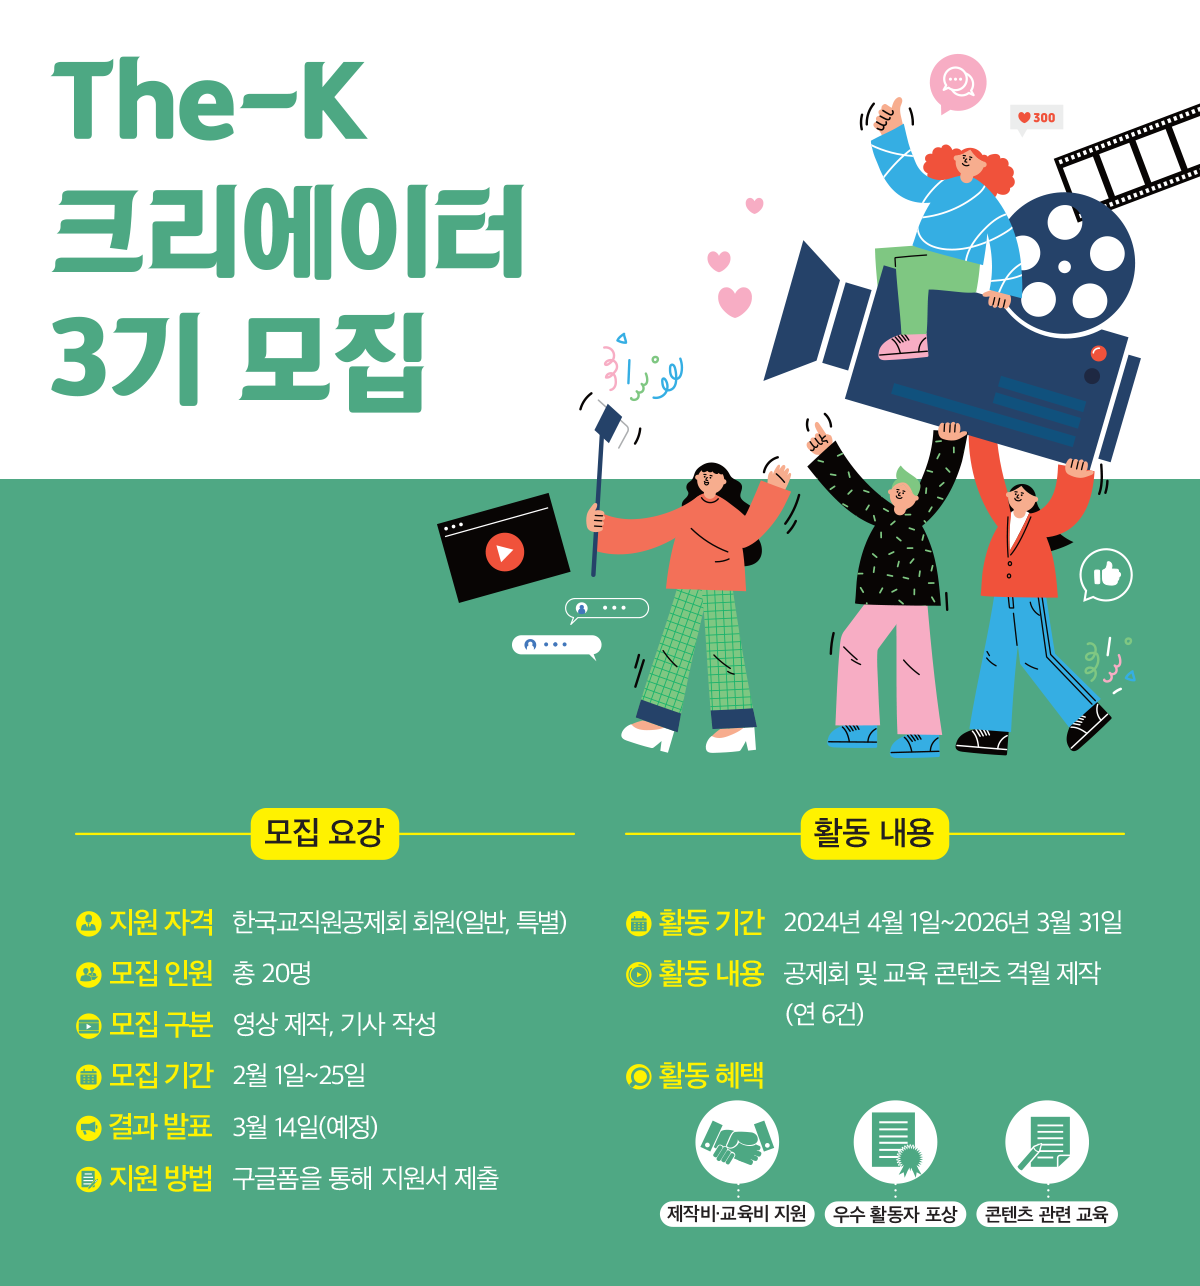 The-K 포커스 3_07